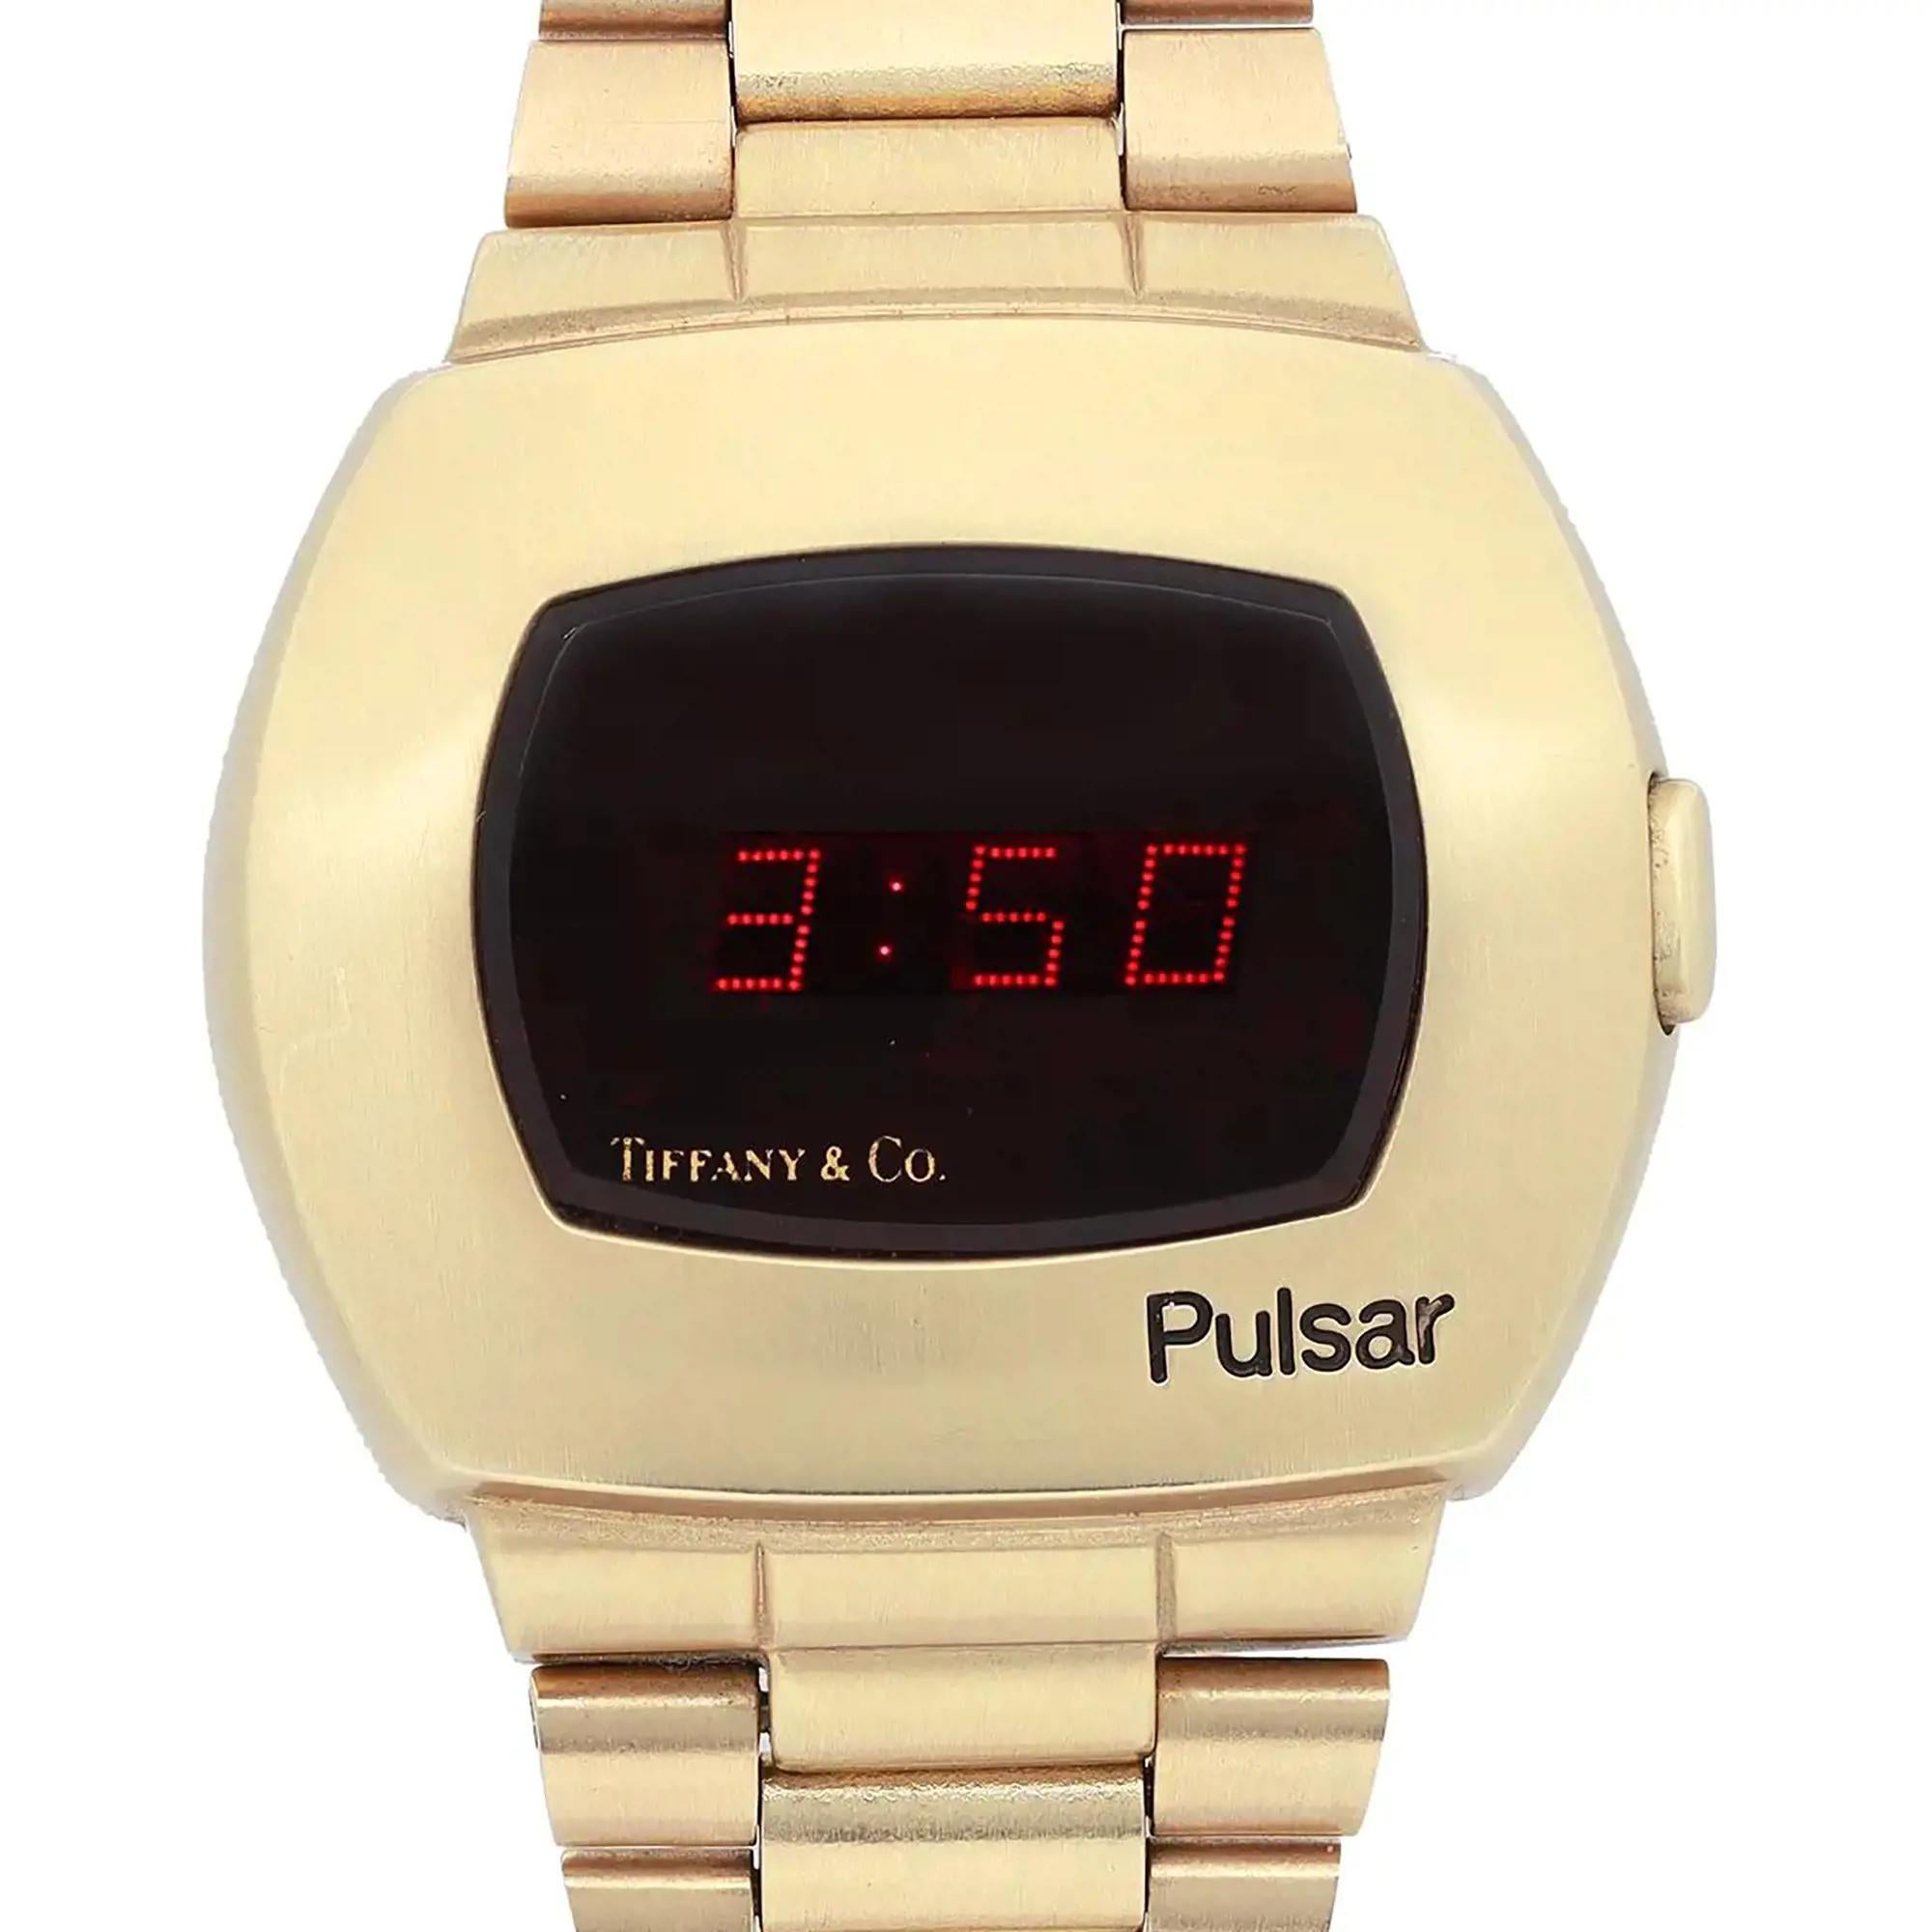 This beautiful vintage watch was first introduced in the early 1970s. The 14k yellow gold version of the Pulsar P2 makes it a very rear and highly sought-after timepiece. Tiffany & Co logo on the crystal. Highly collectible watch. Comes with papers,